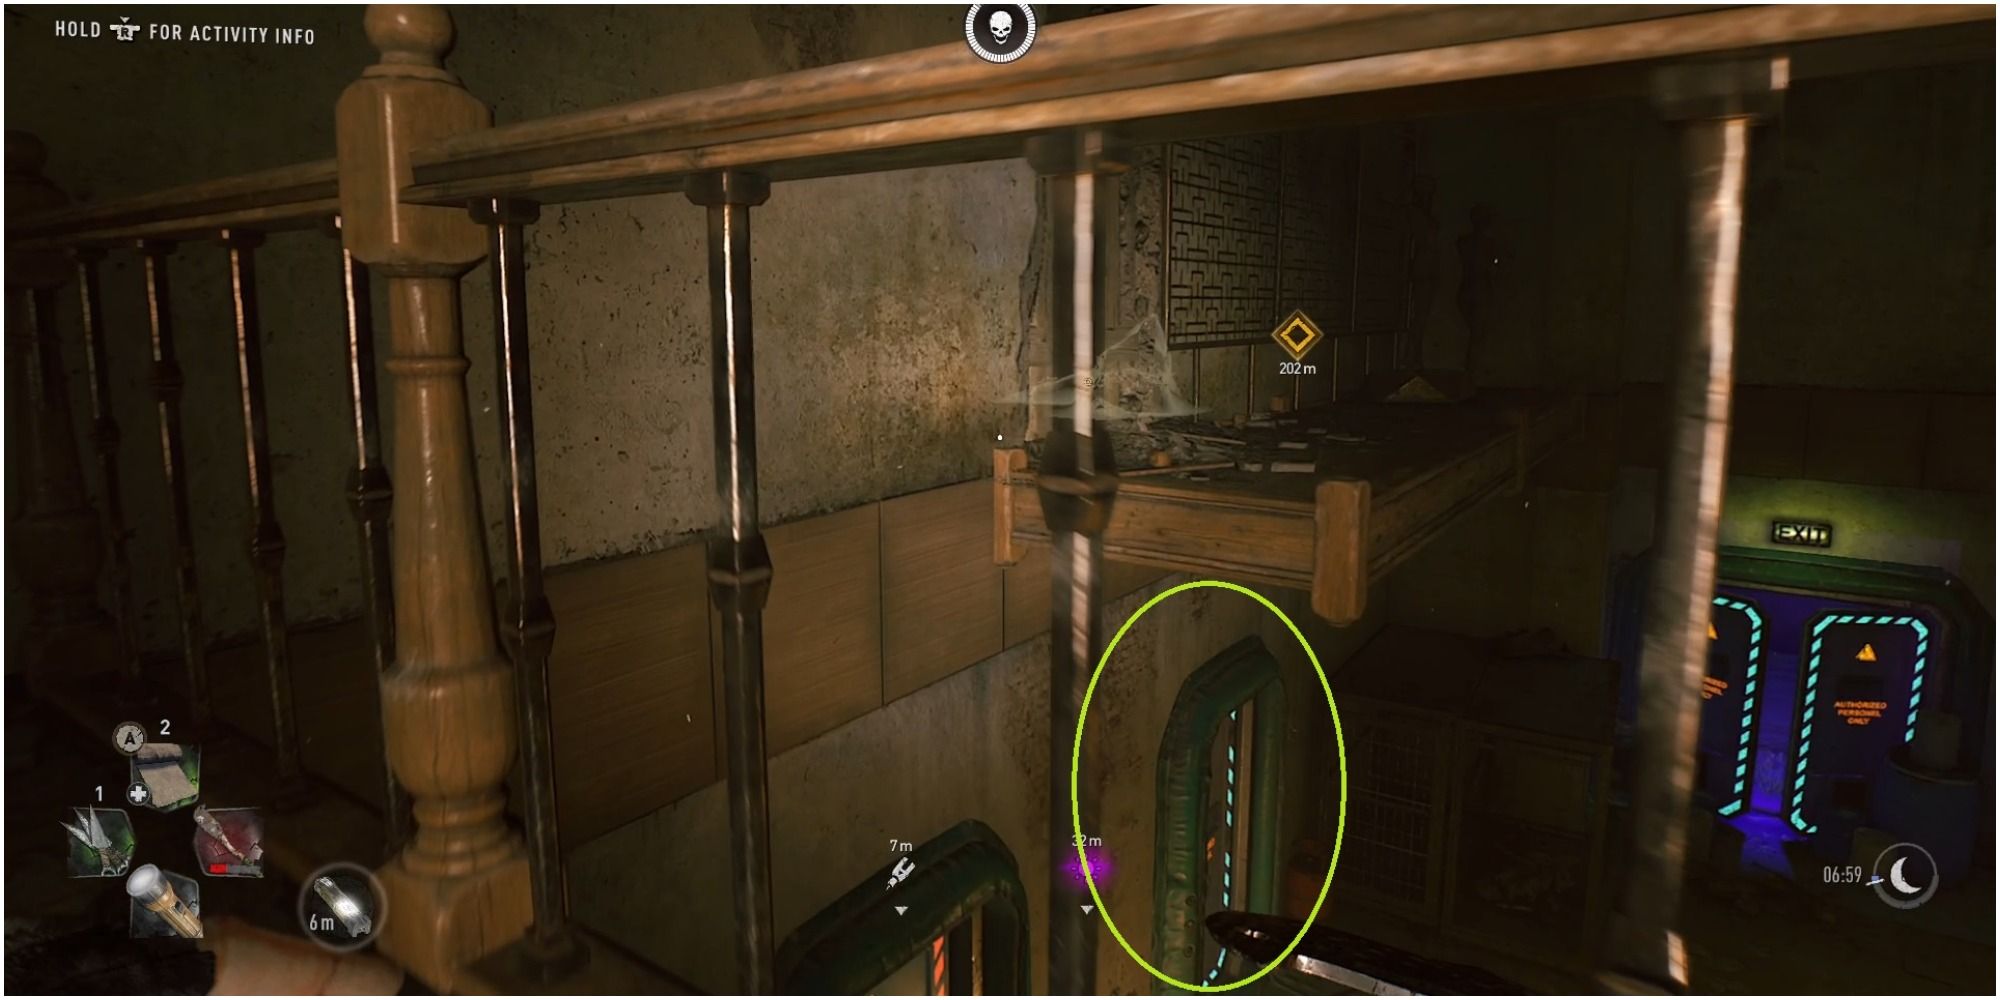 Dying Light 2 Third Floor Door That Leads To The Final GRE Cache